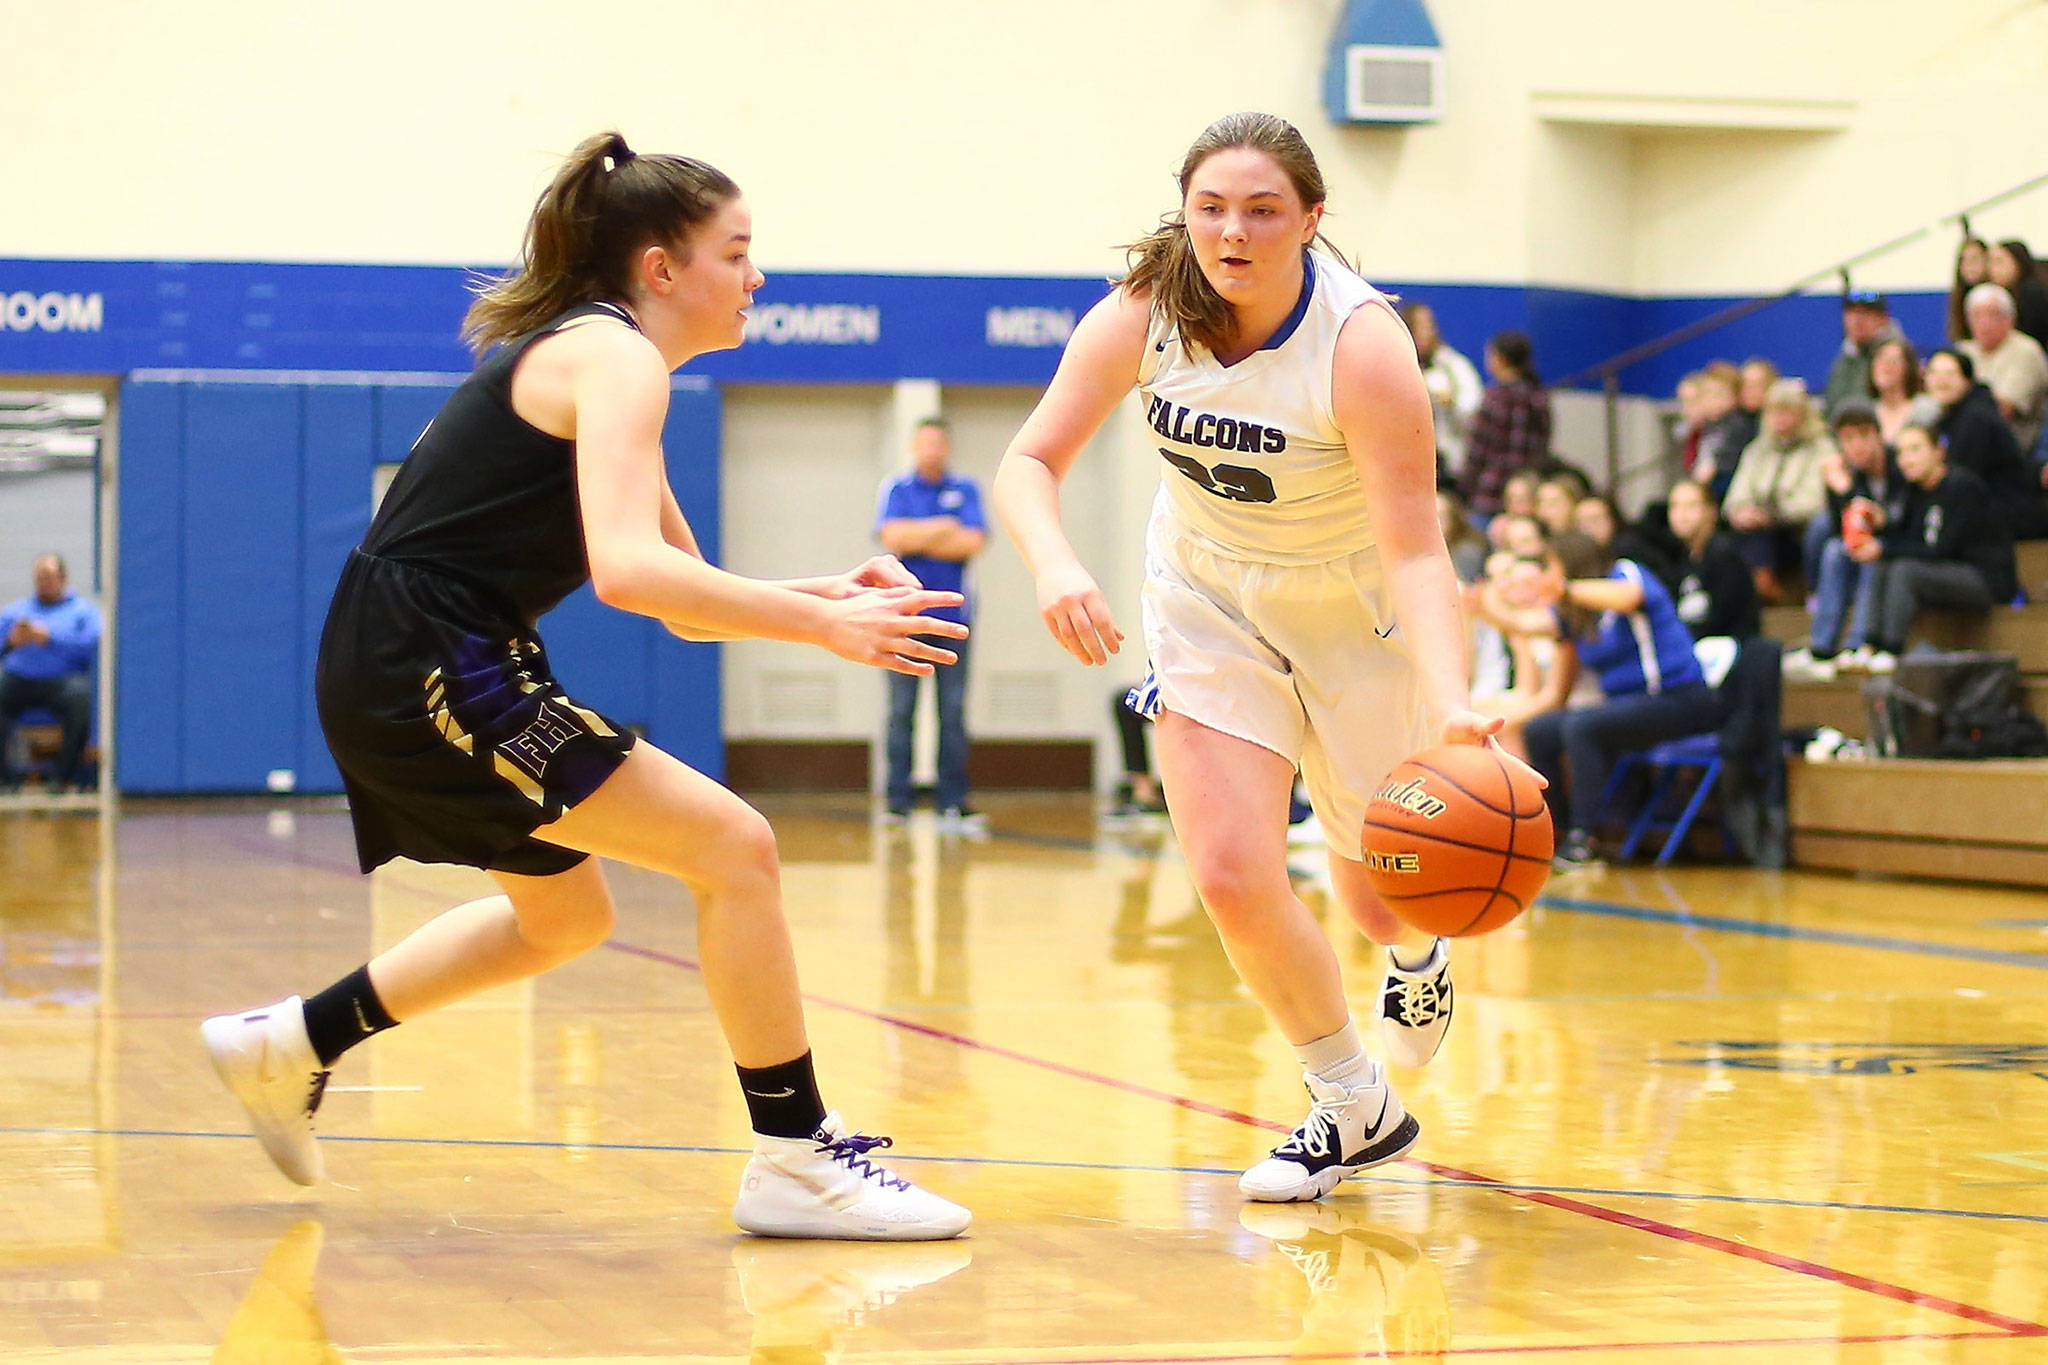 Wolverines use big 2nd quarter to beat Falcons / Girls basketball